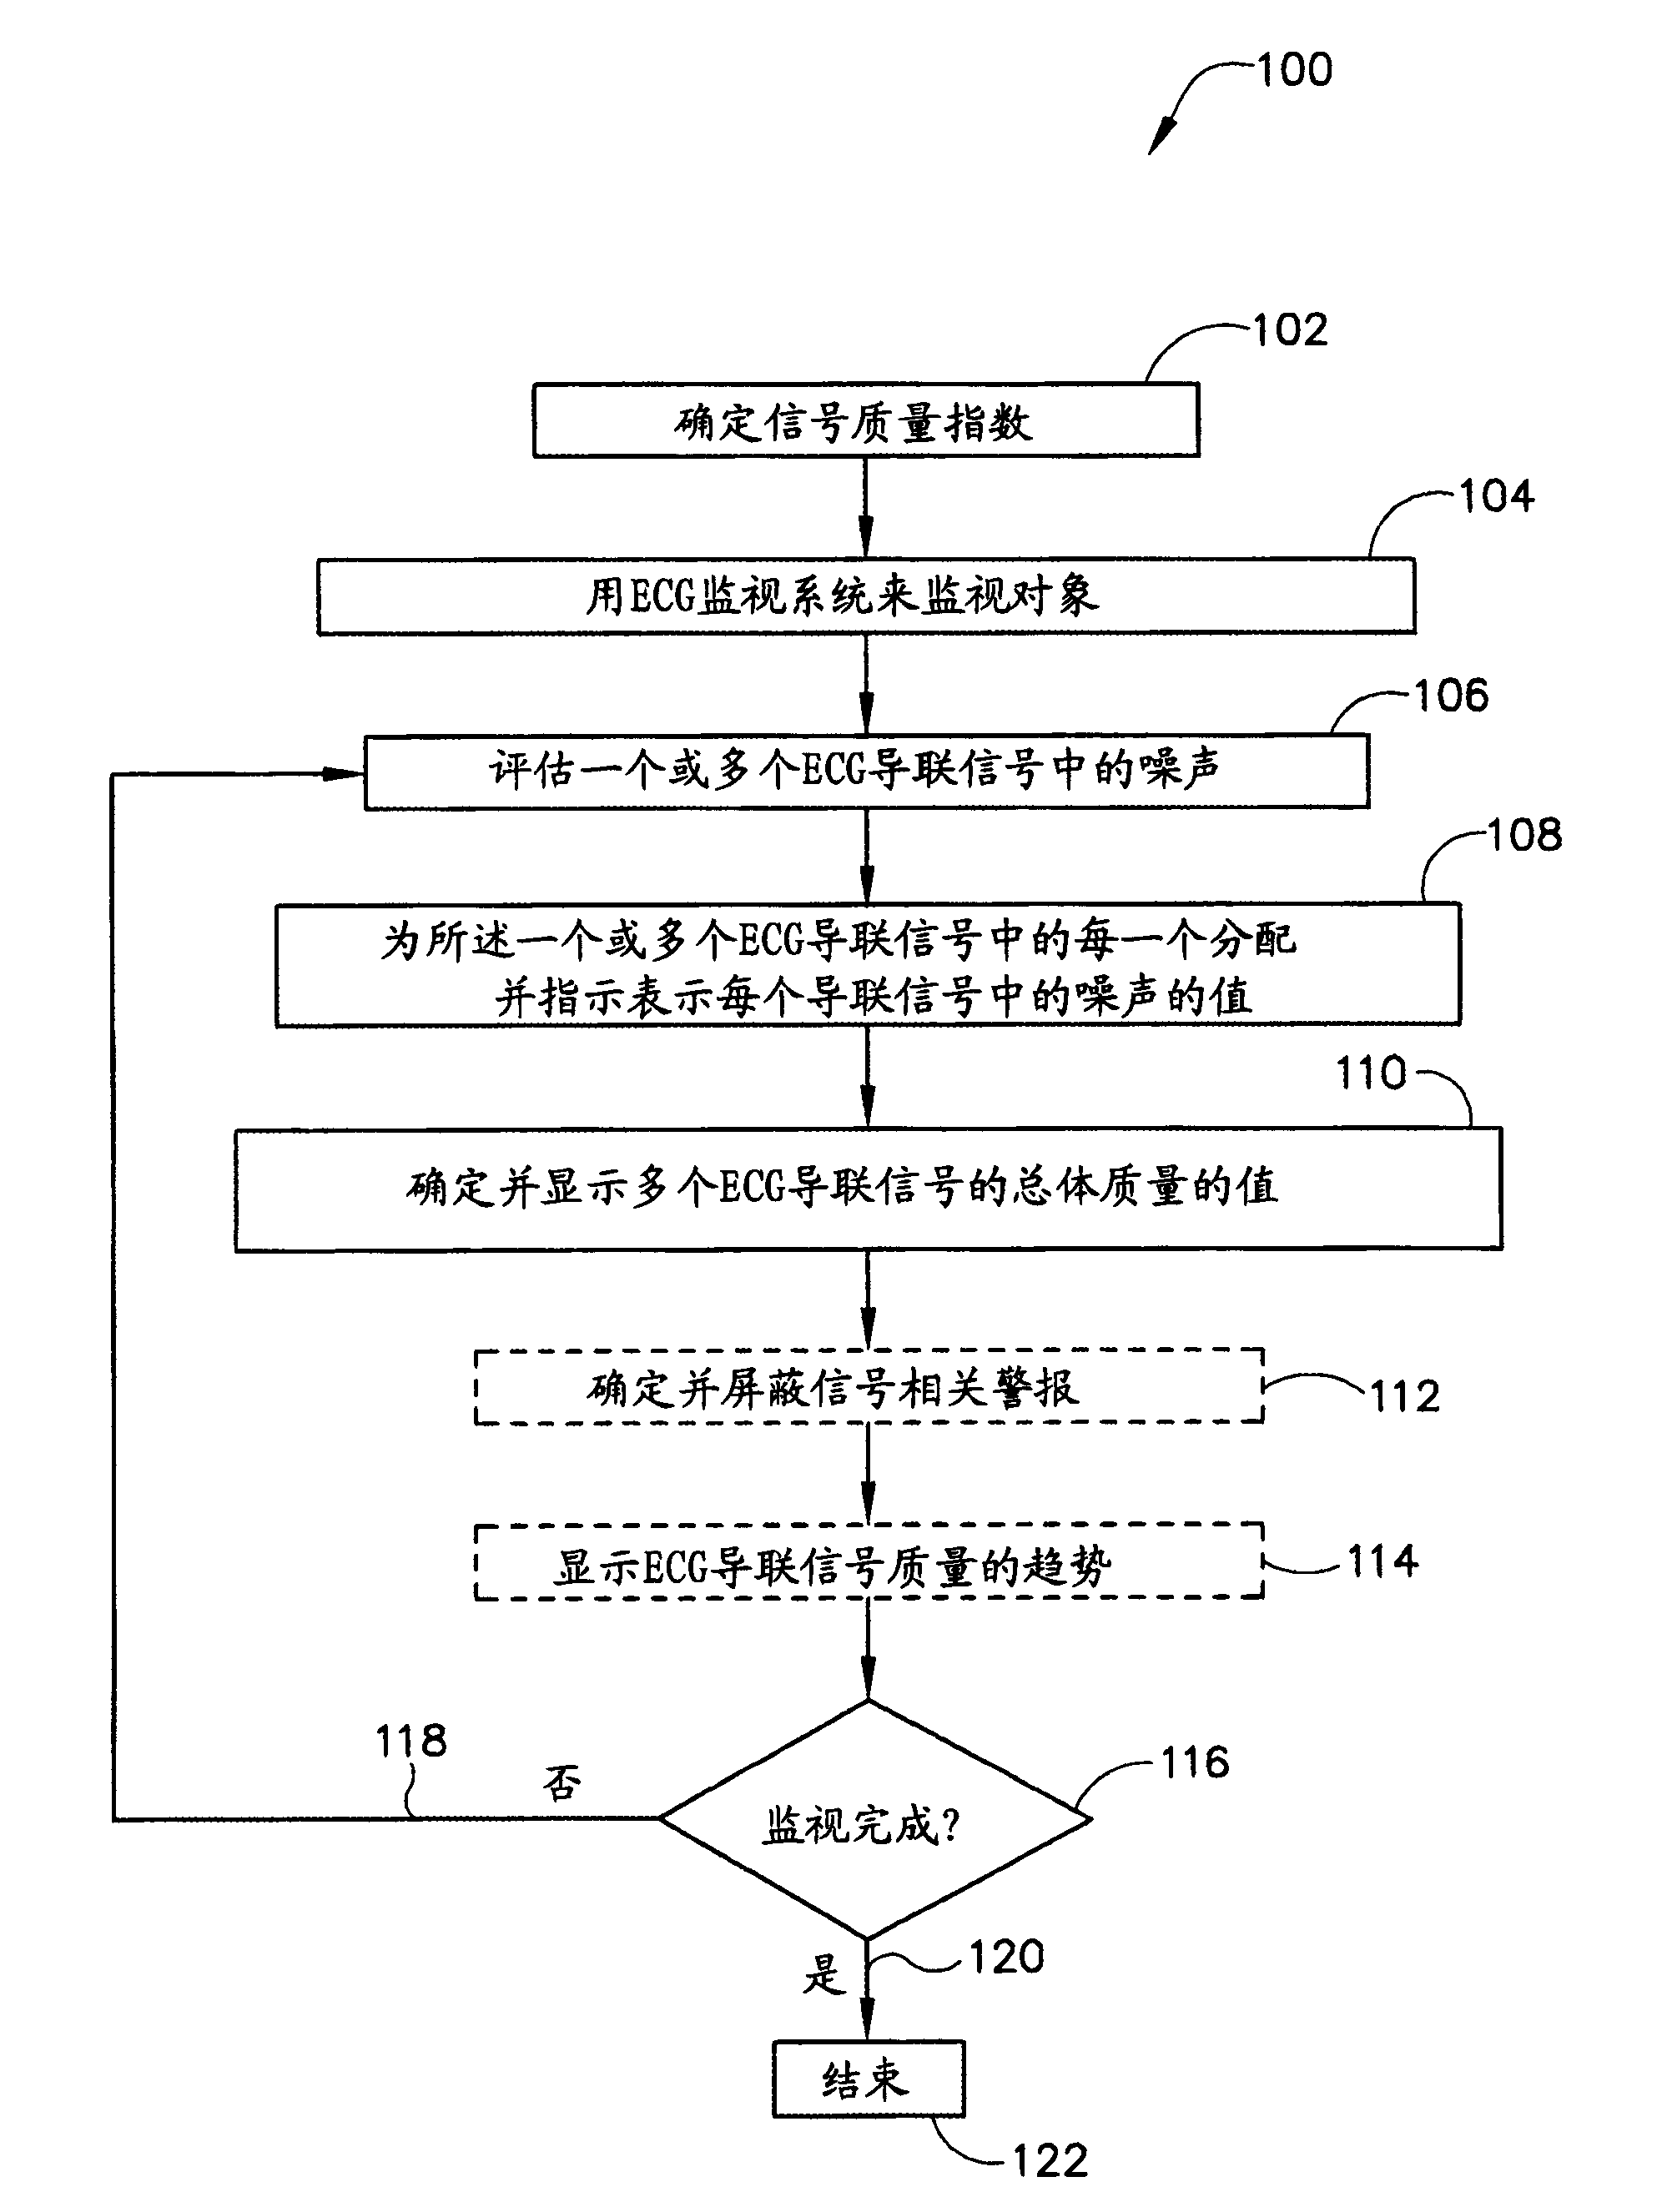 System and method for signal quality indication and false alarm reduction in ECG monitoring systems